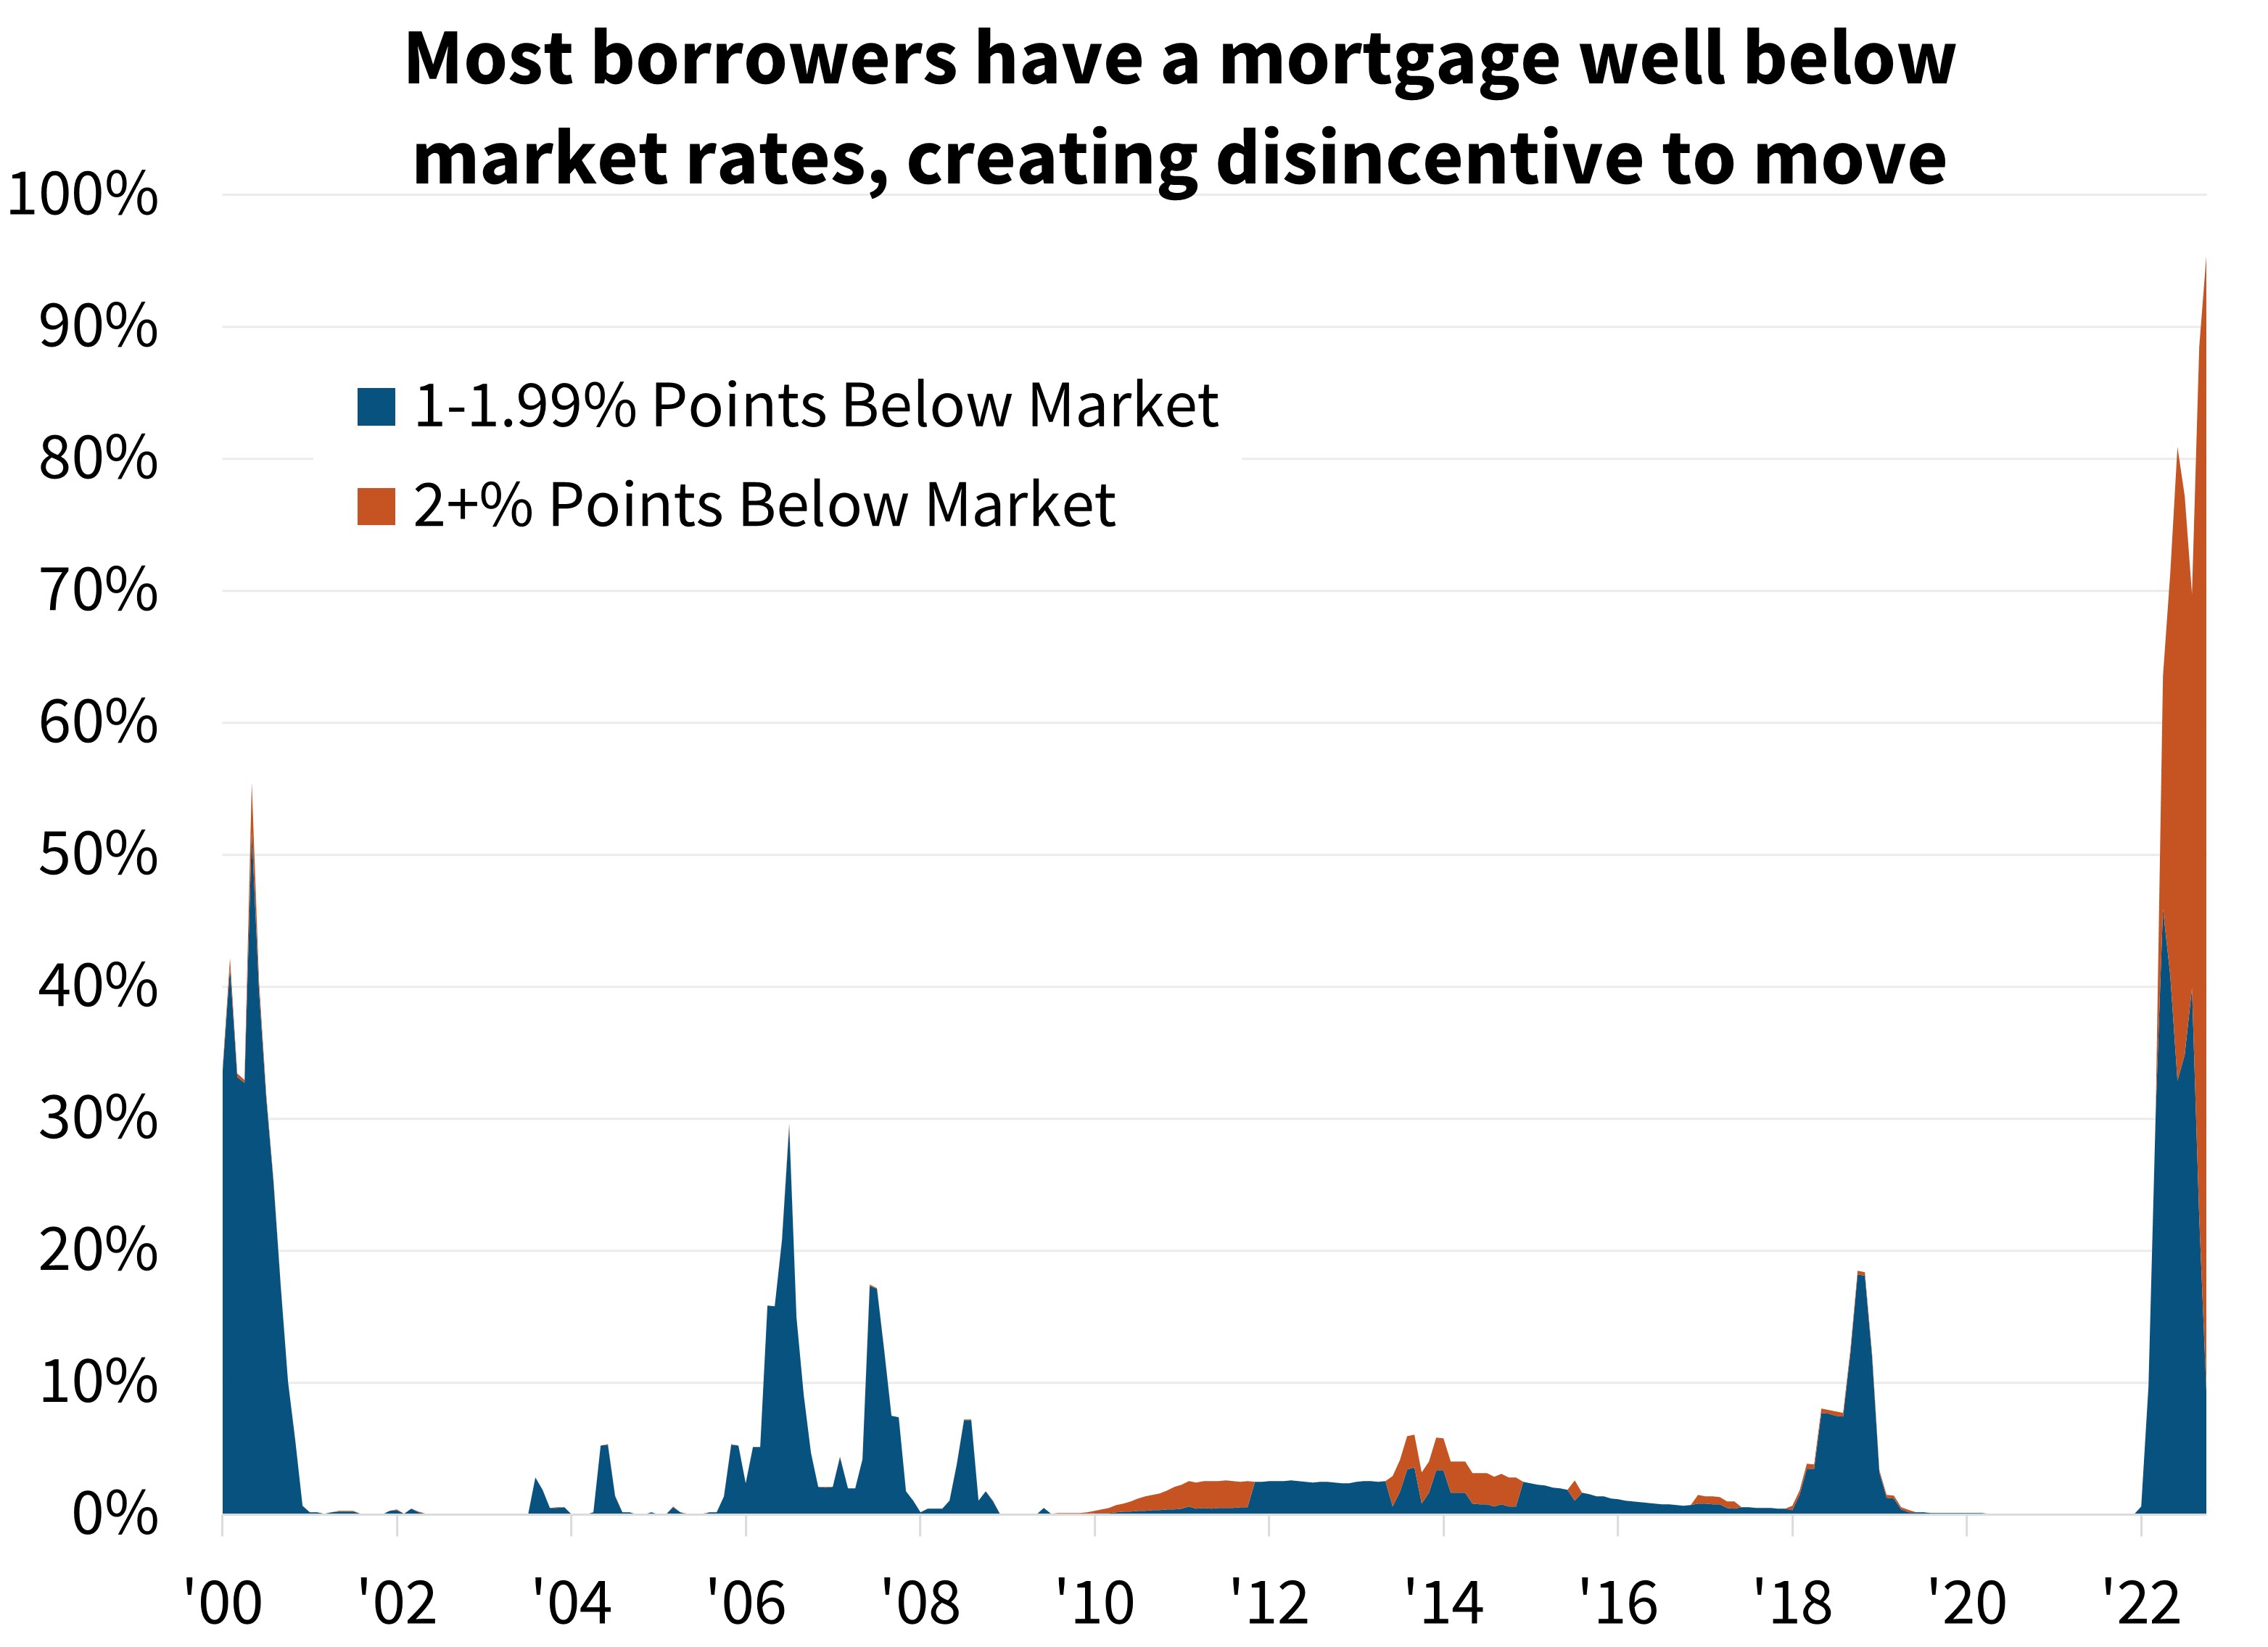  Most borrowers have a mortgage well below market rates, creating disincentive to move 